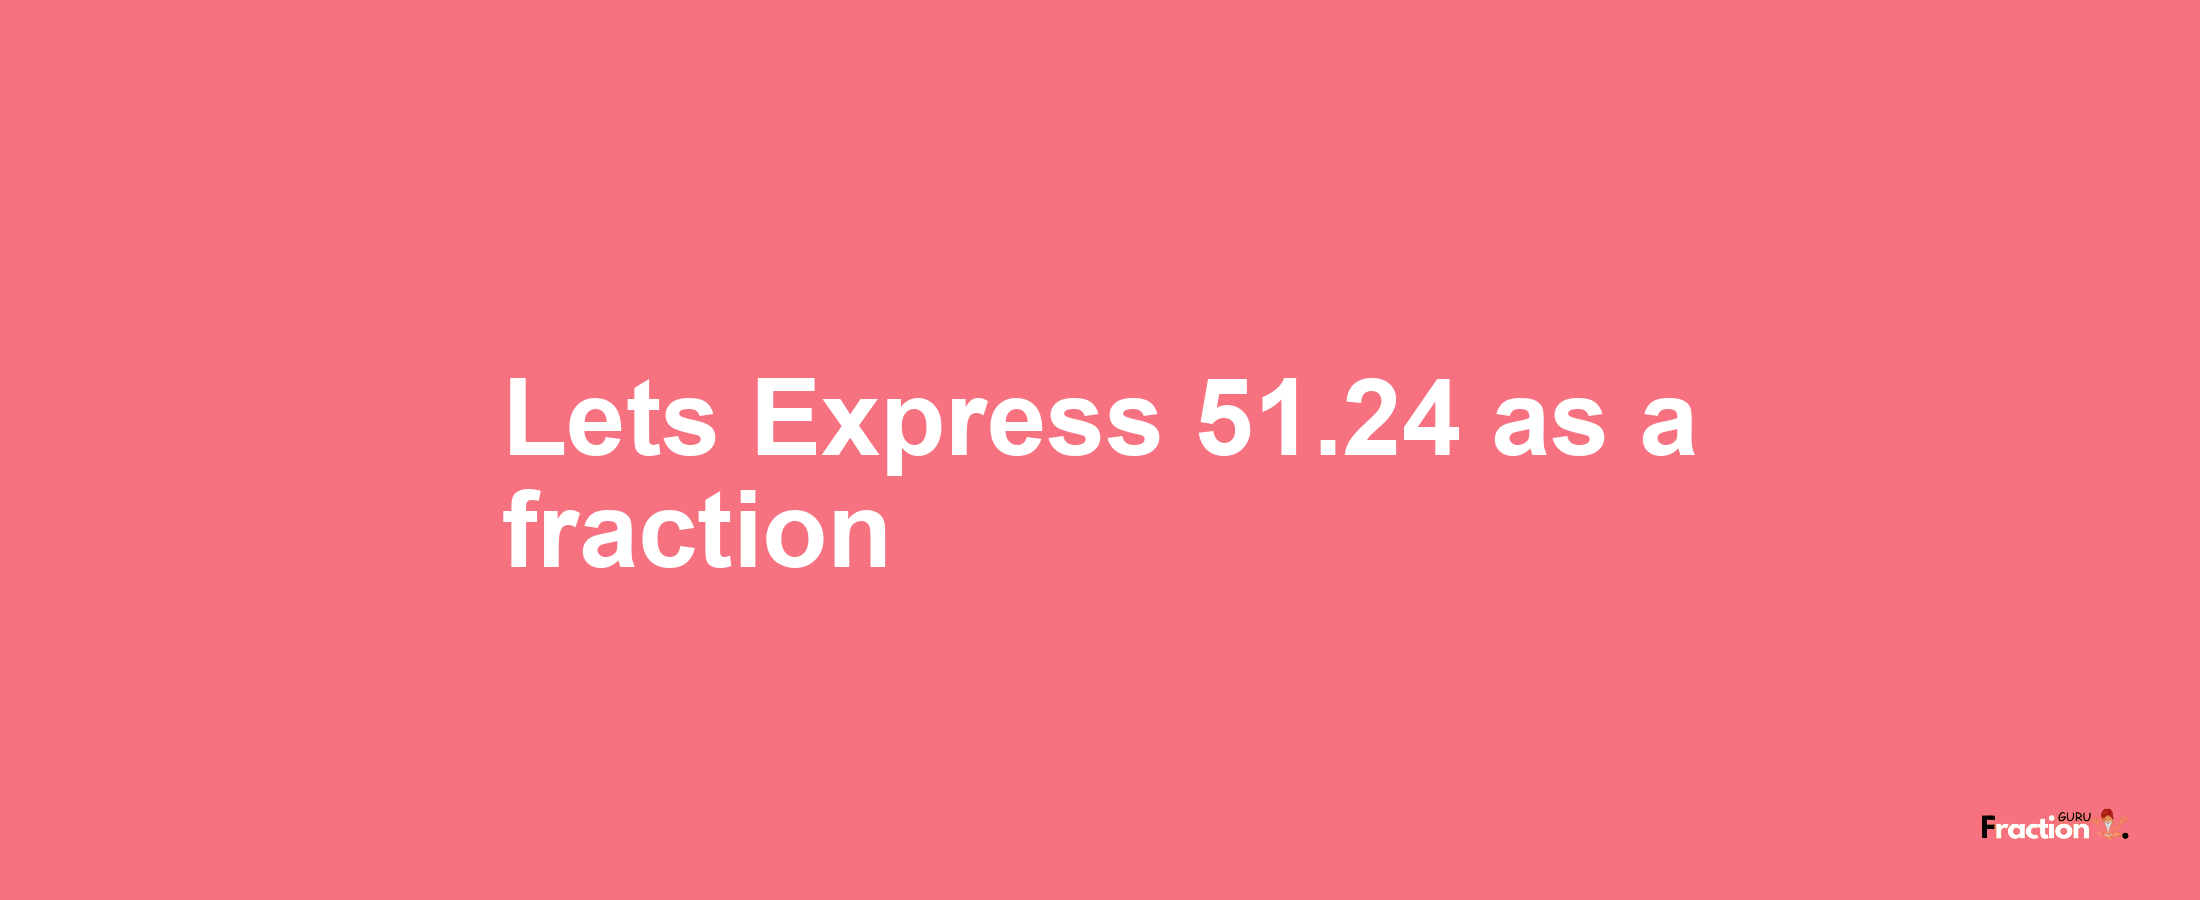 Lets Express 51.24 as afraction